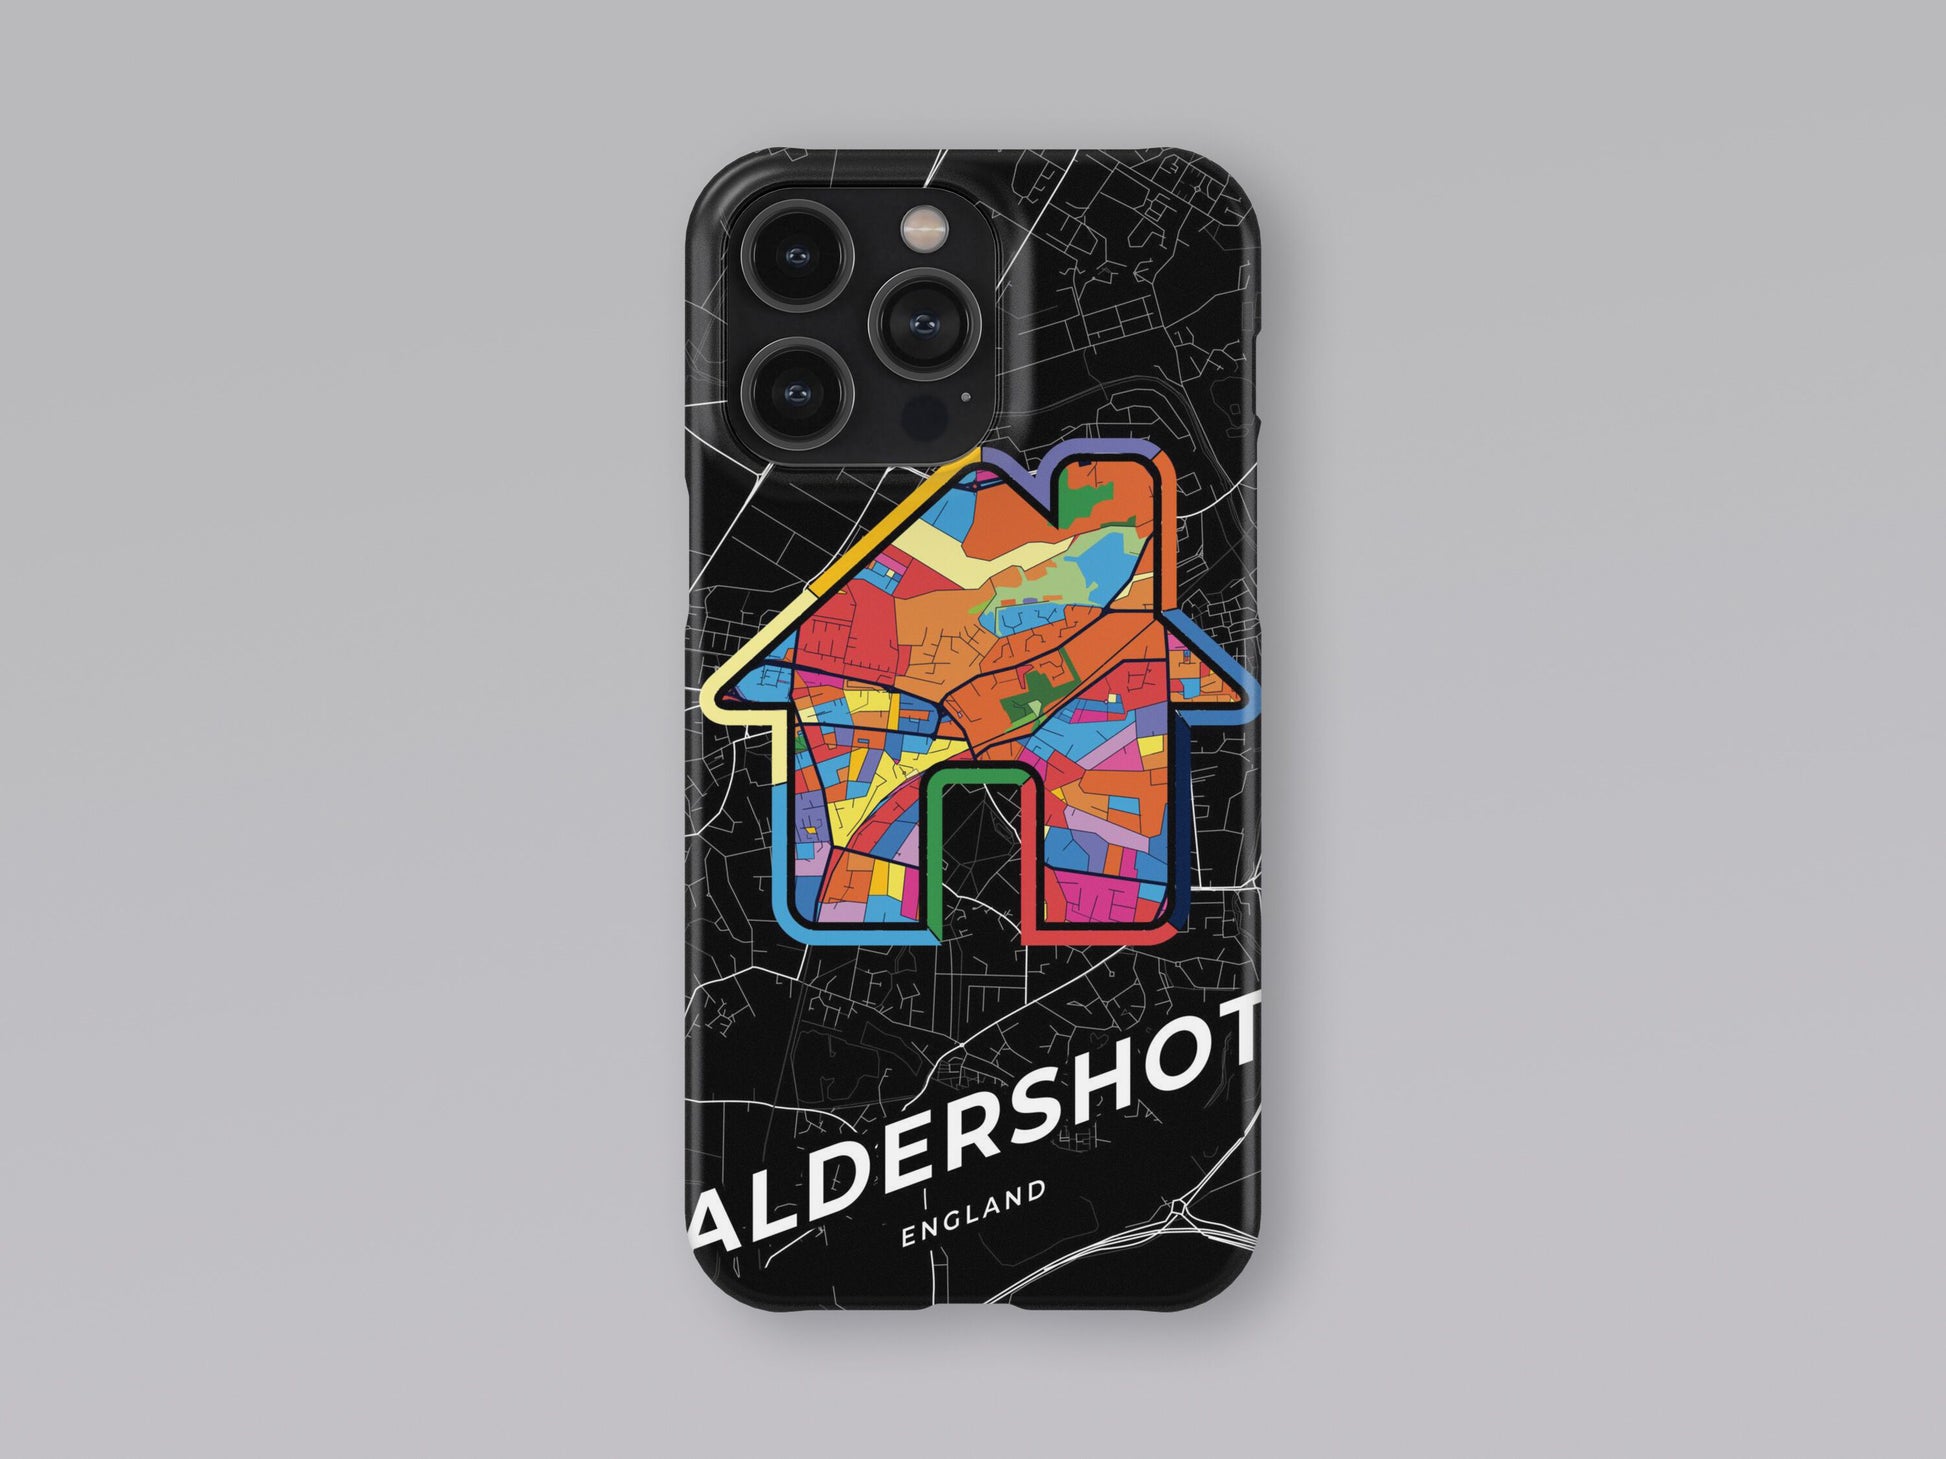 Aldershot England slim phone case with colorful icon. Birthday, wedding or housewarming gift. Couple match cases. 3